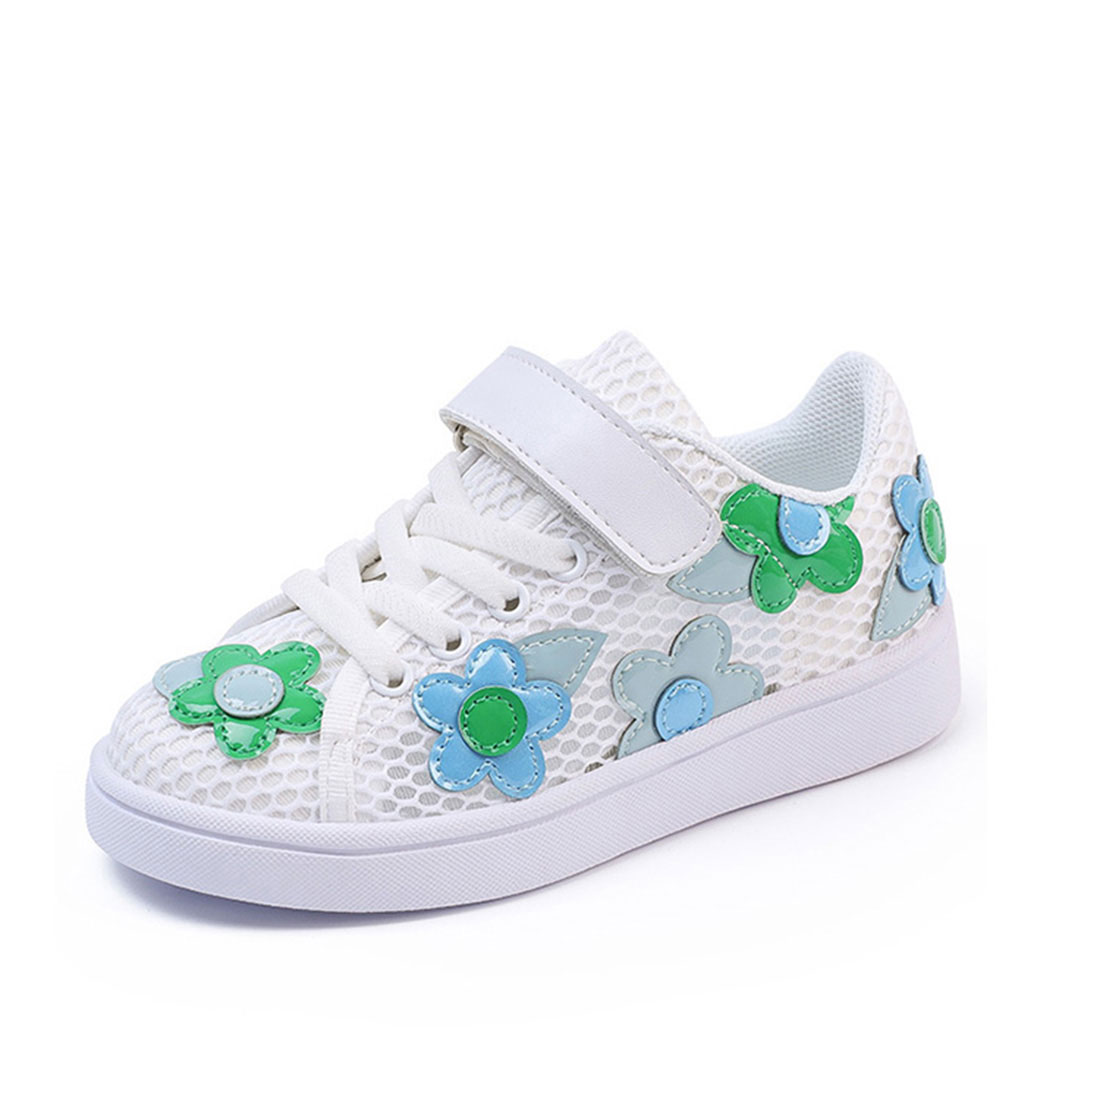 Breathable mesh white casual summer walking little flower kid sneakers shoes